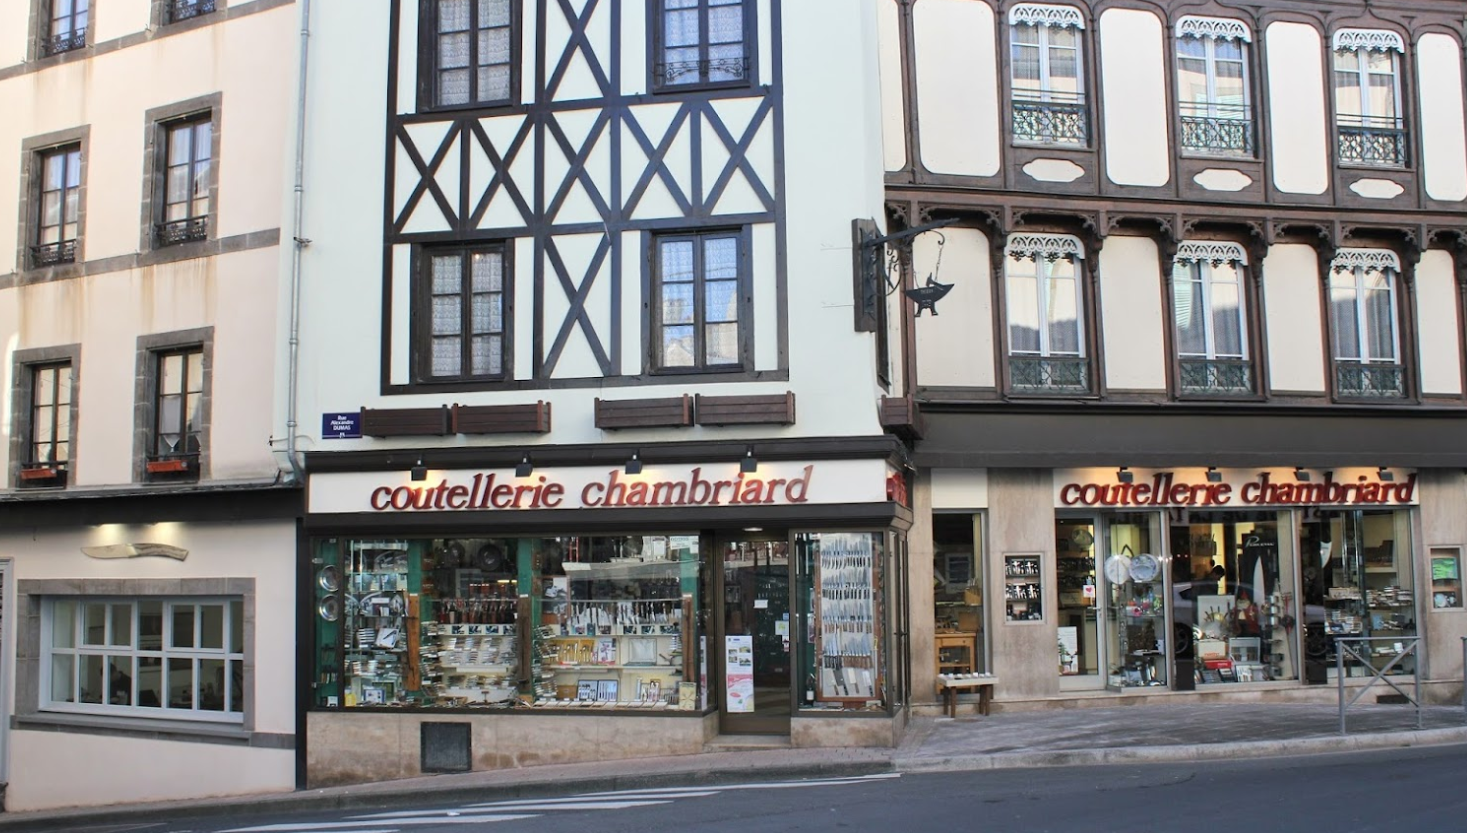  The 5 BEST Places to get Küchenmesser in Thiers,France.